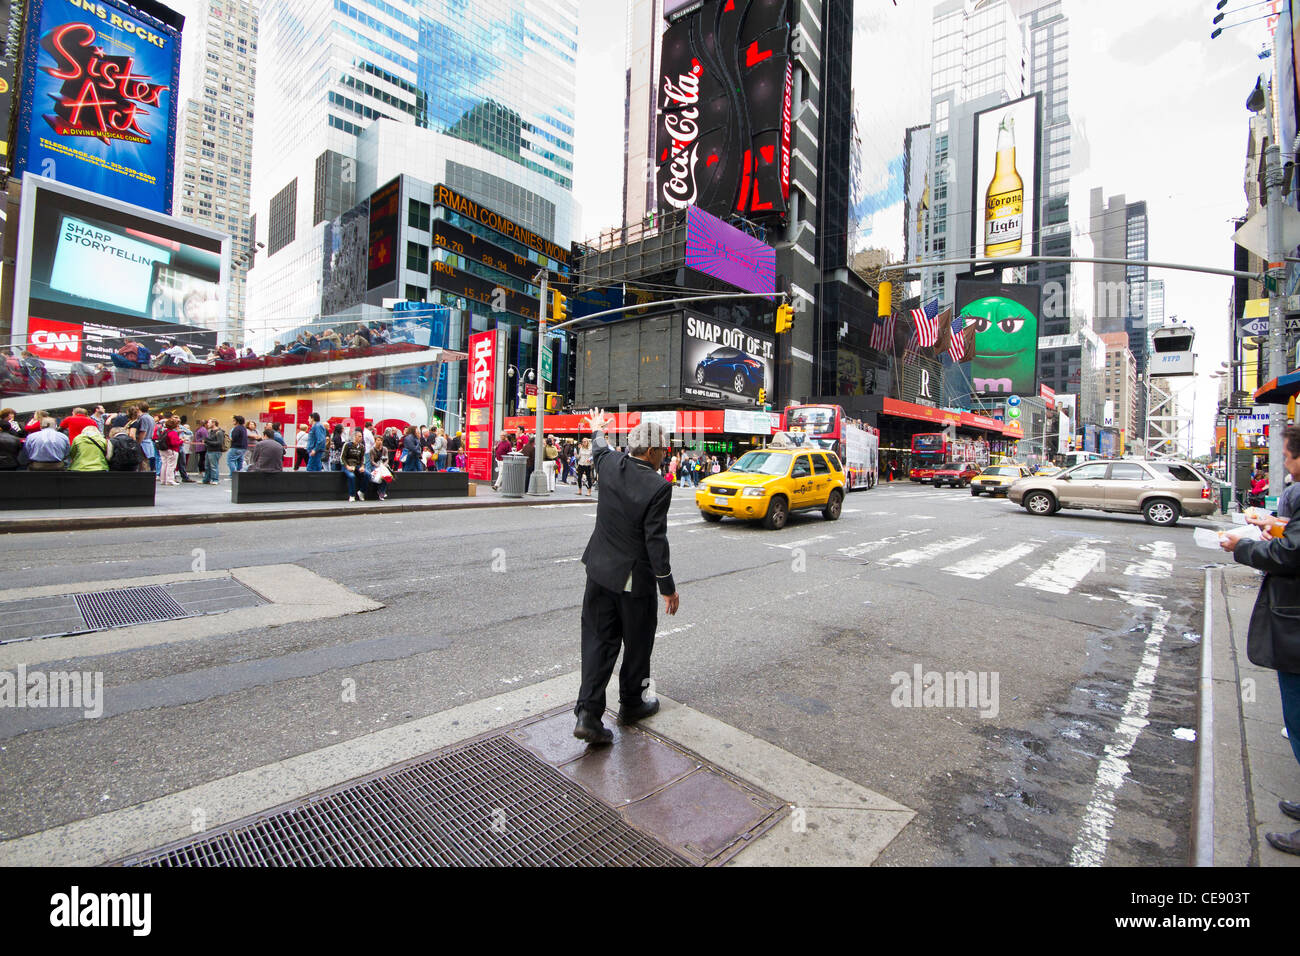 Doorman calls/hails taxi by waving hand in New York City. Stock Photo